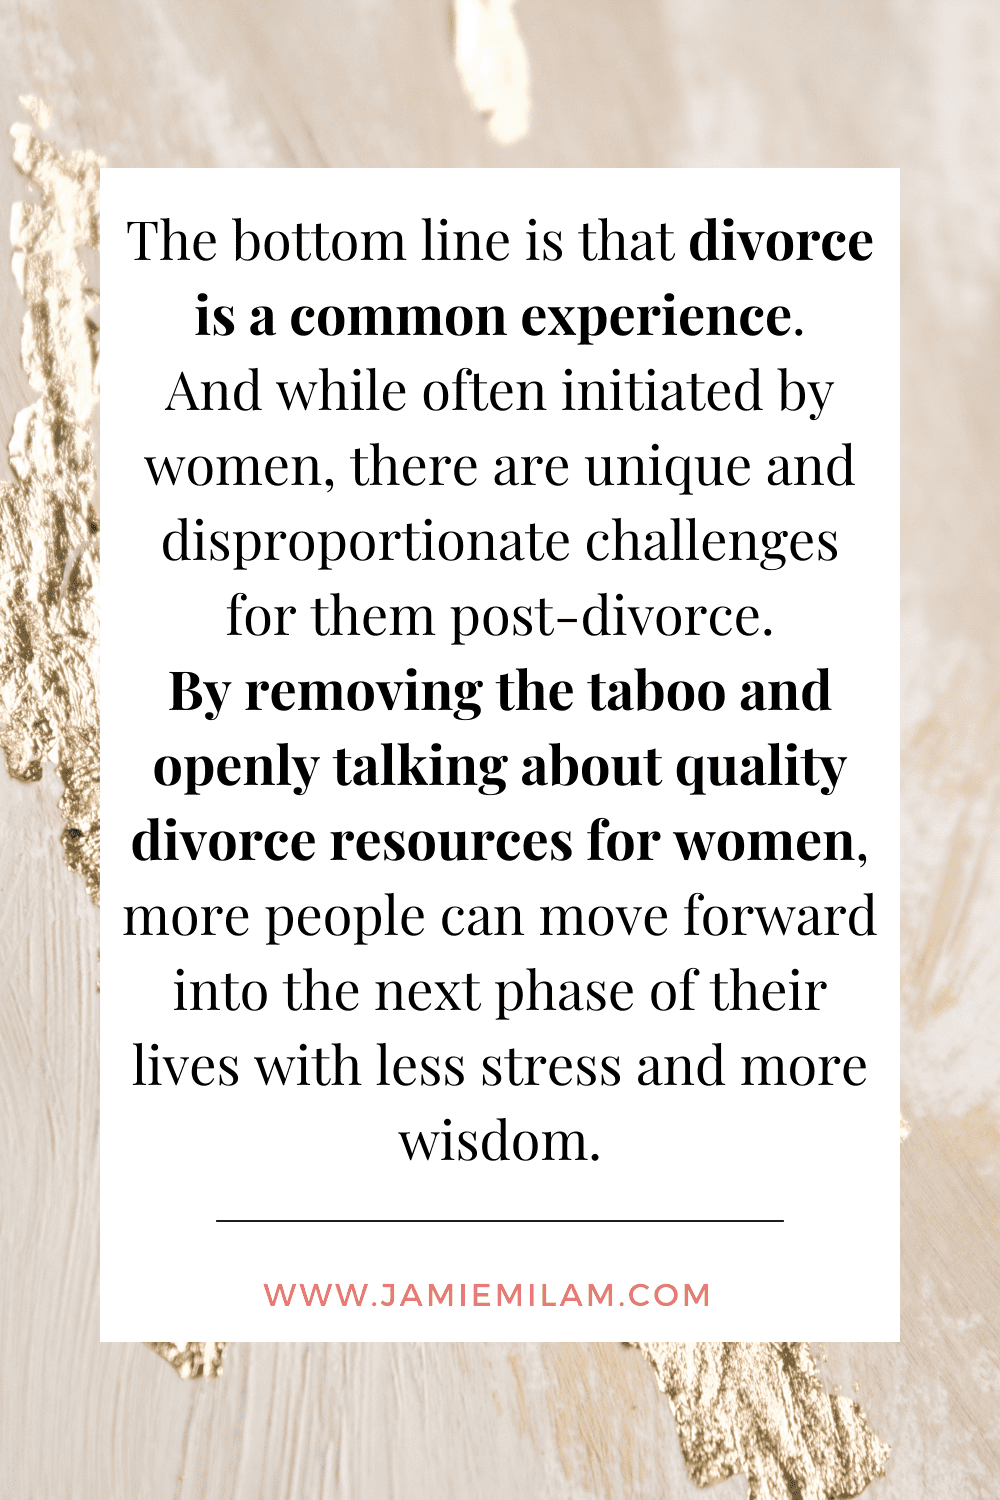 Quote from blog post that says: "The bottom line is that divorce is a common experience. And while often initiated by women, there are unique and disproportionate challenges for them post-divorce. By removing the taboo and openly talking about quality divorce resources for women, more people can move forward into the next phase of their lives with less stress and more wisdom."